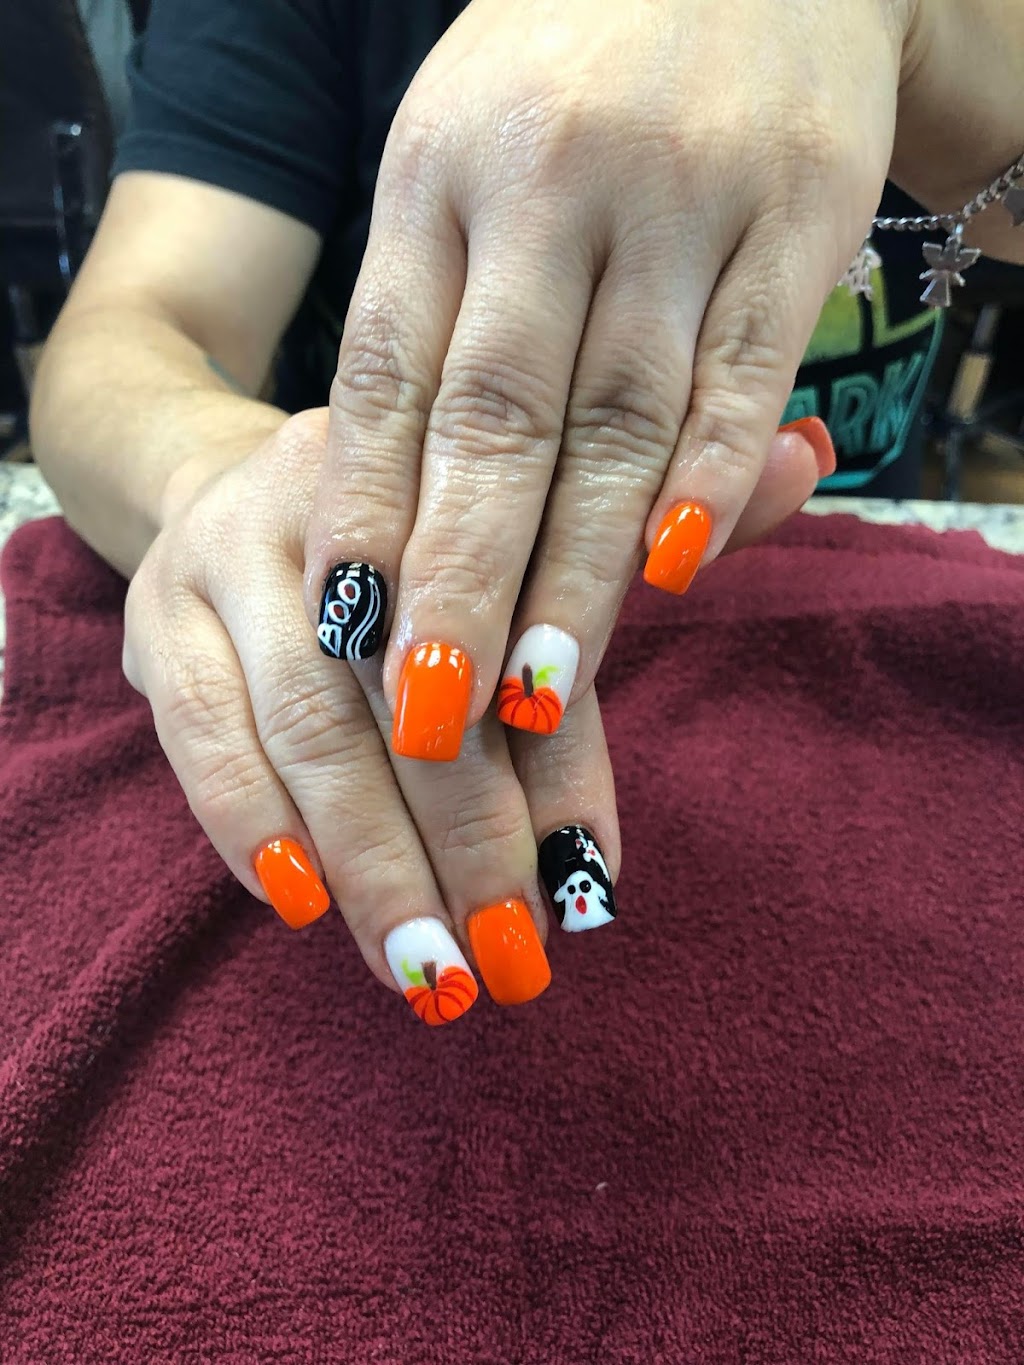 GREAT NAILS | 1512 Town Center Dr STE 650, Pflugerville, TX 78660 | Phone: (512) 251-4447